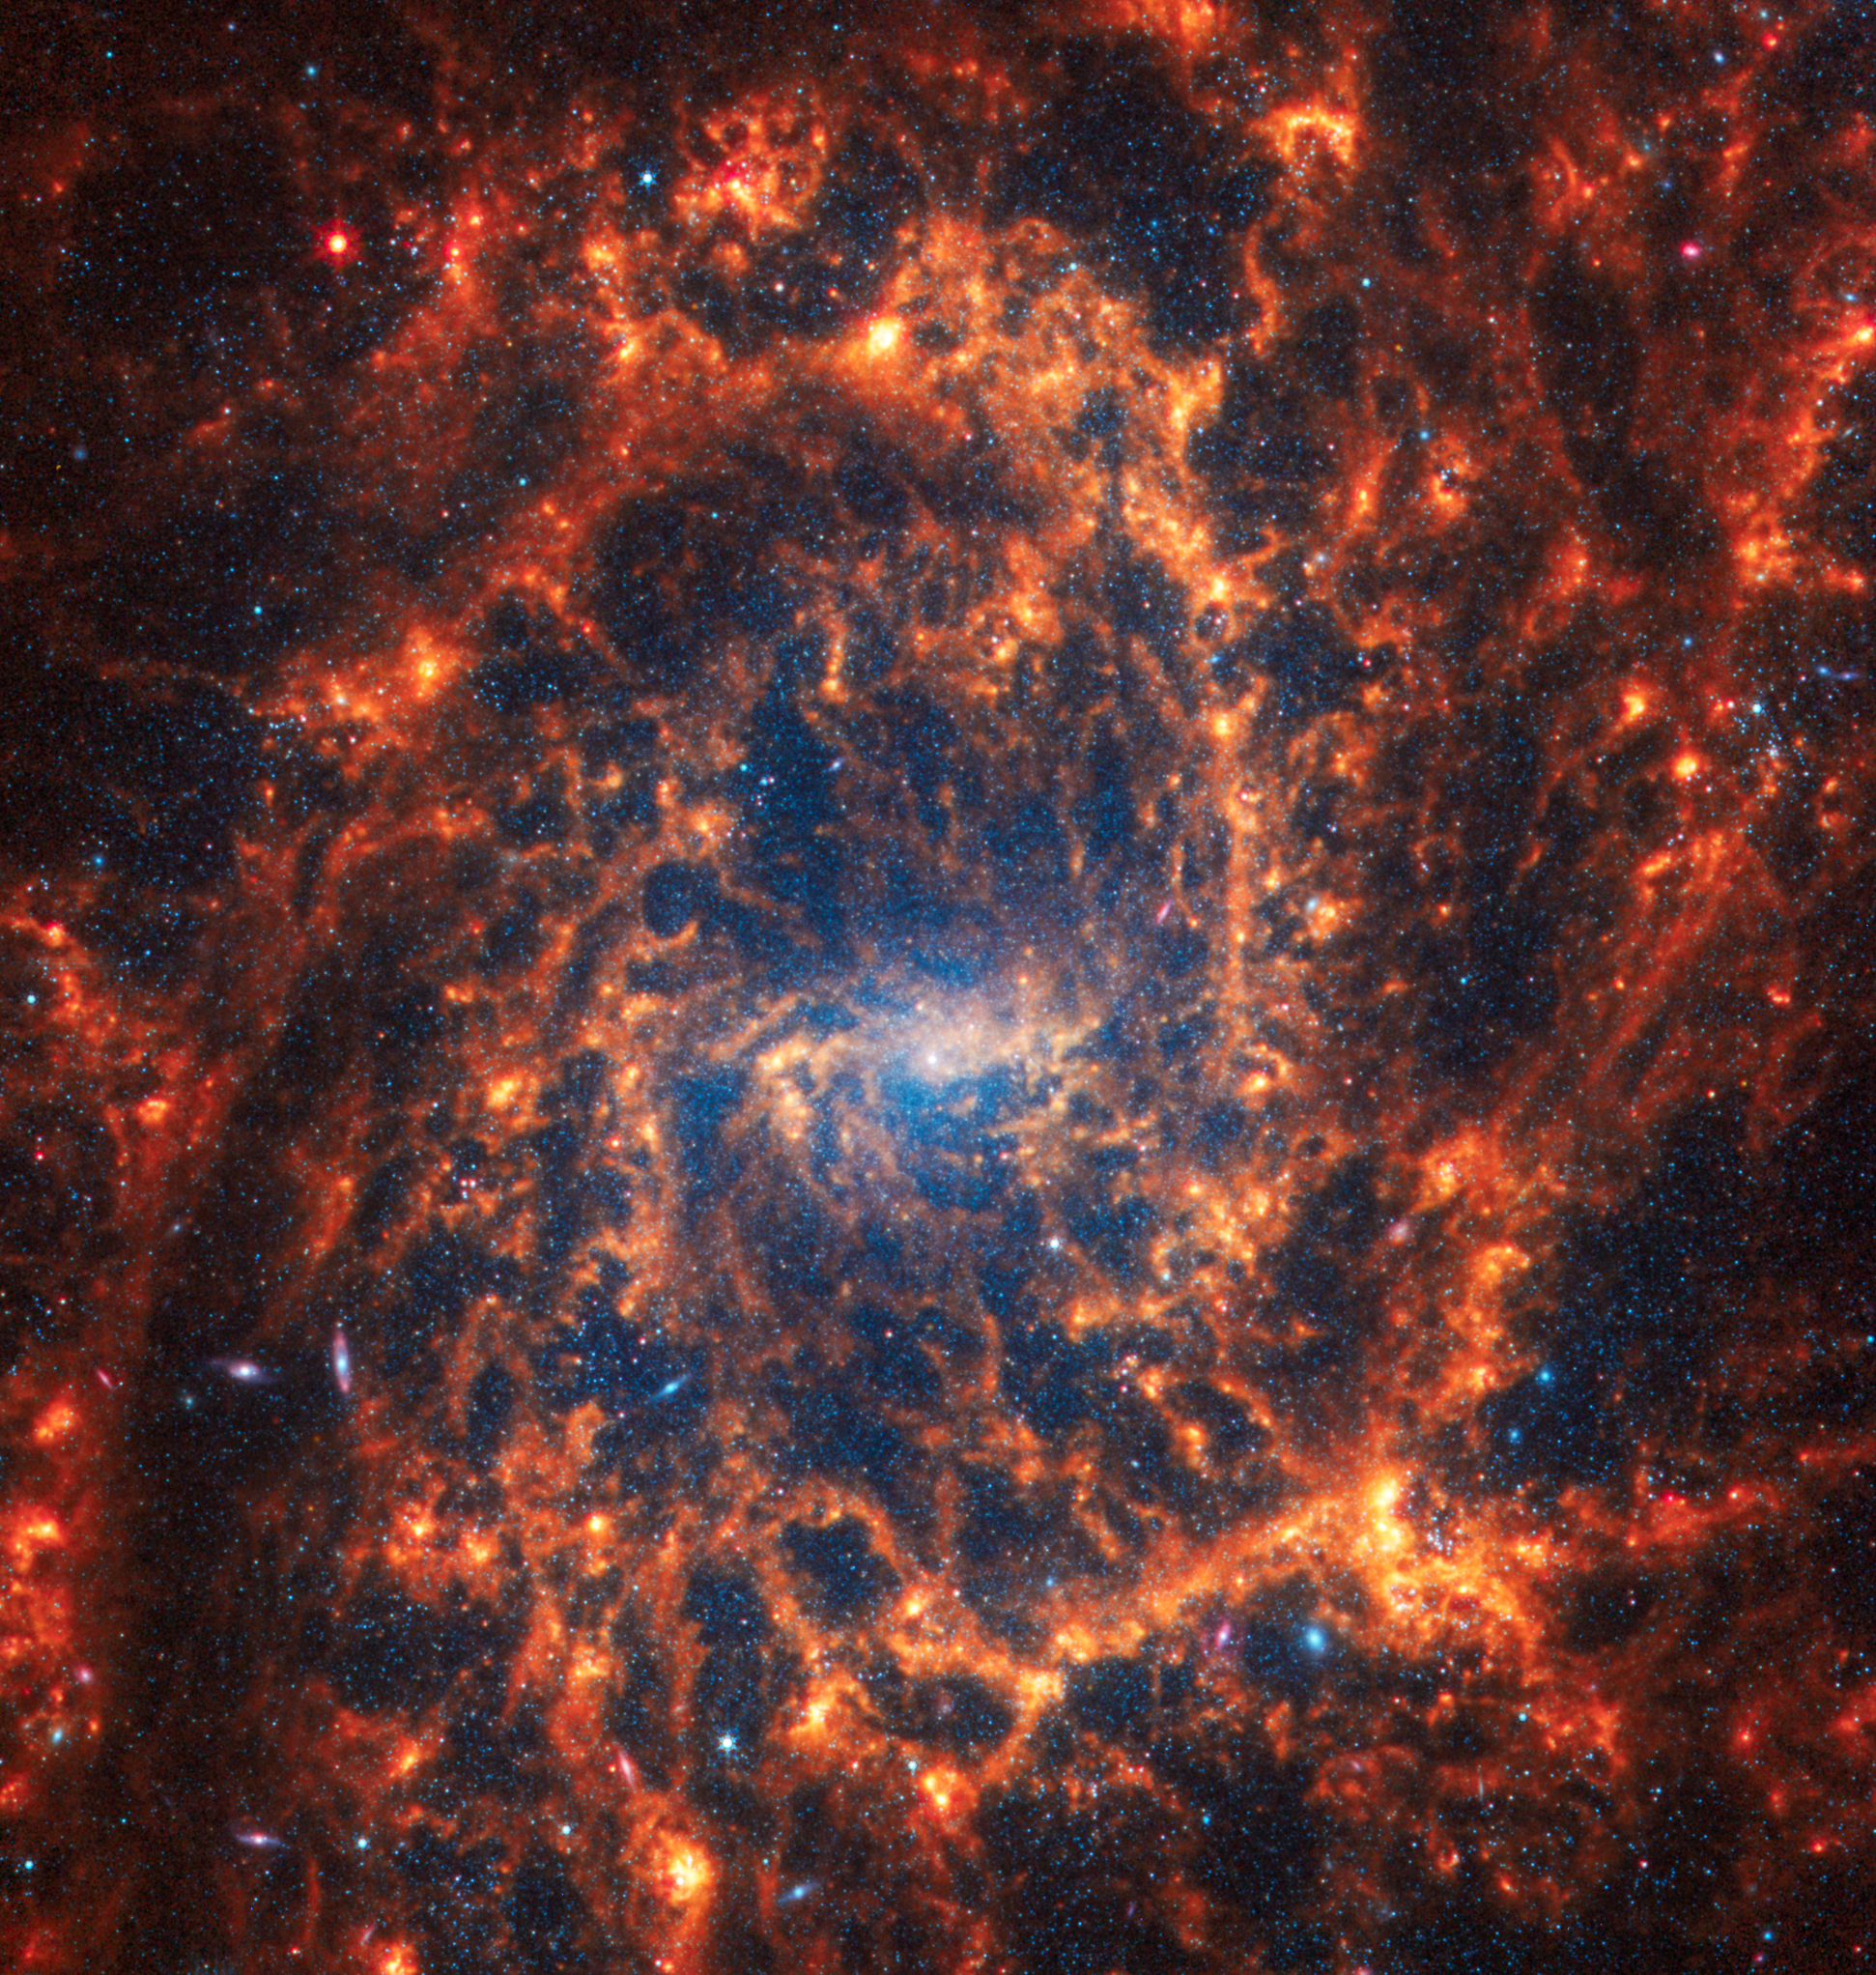 Webb’s image of NGC 2835 shows a densely populated face-on spiral galaxy anchored by its small central region, which is immediately engulfed in the orange spiral arms. A blue glow of stars begins at the core and spreads outward. Spiny orange spiral arms made of stars, gas, and dust start at the center and extend to the edges, rotating counterclockwise and taking up most of the area. Tiny pinpoints of blue light, which are stars or star clusters, are scattered across the image, but are easiest to spot where there appear to be black bubbles within the orange dust. The spiral arms of the galaxy are largely orange, ranging from dark to bright orange. In a few areas, there are bright orange patches of light within the orange spiral arms, mainly toward the outer edges of the spiral arms. Toward the bottom are some larger pink and blue points of light, some are likely background galaxies that appear like disks seen from the side.